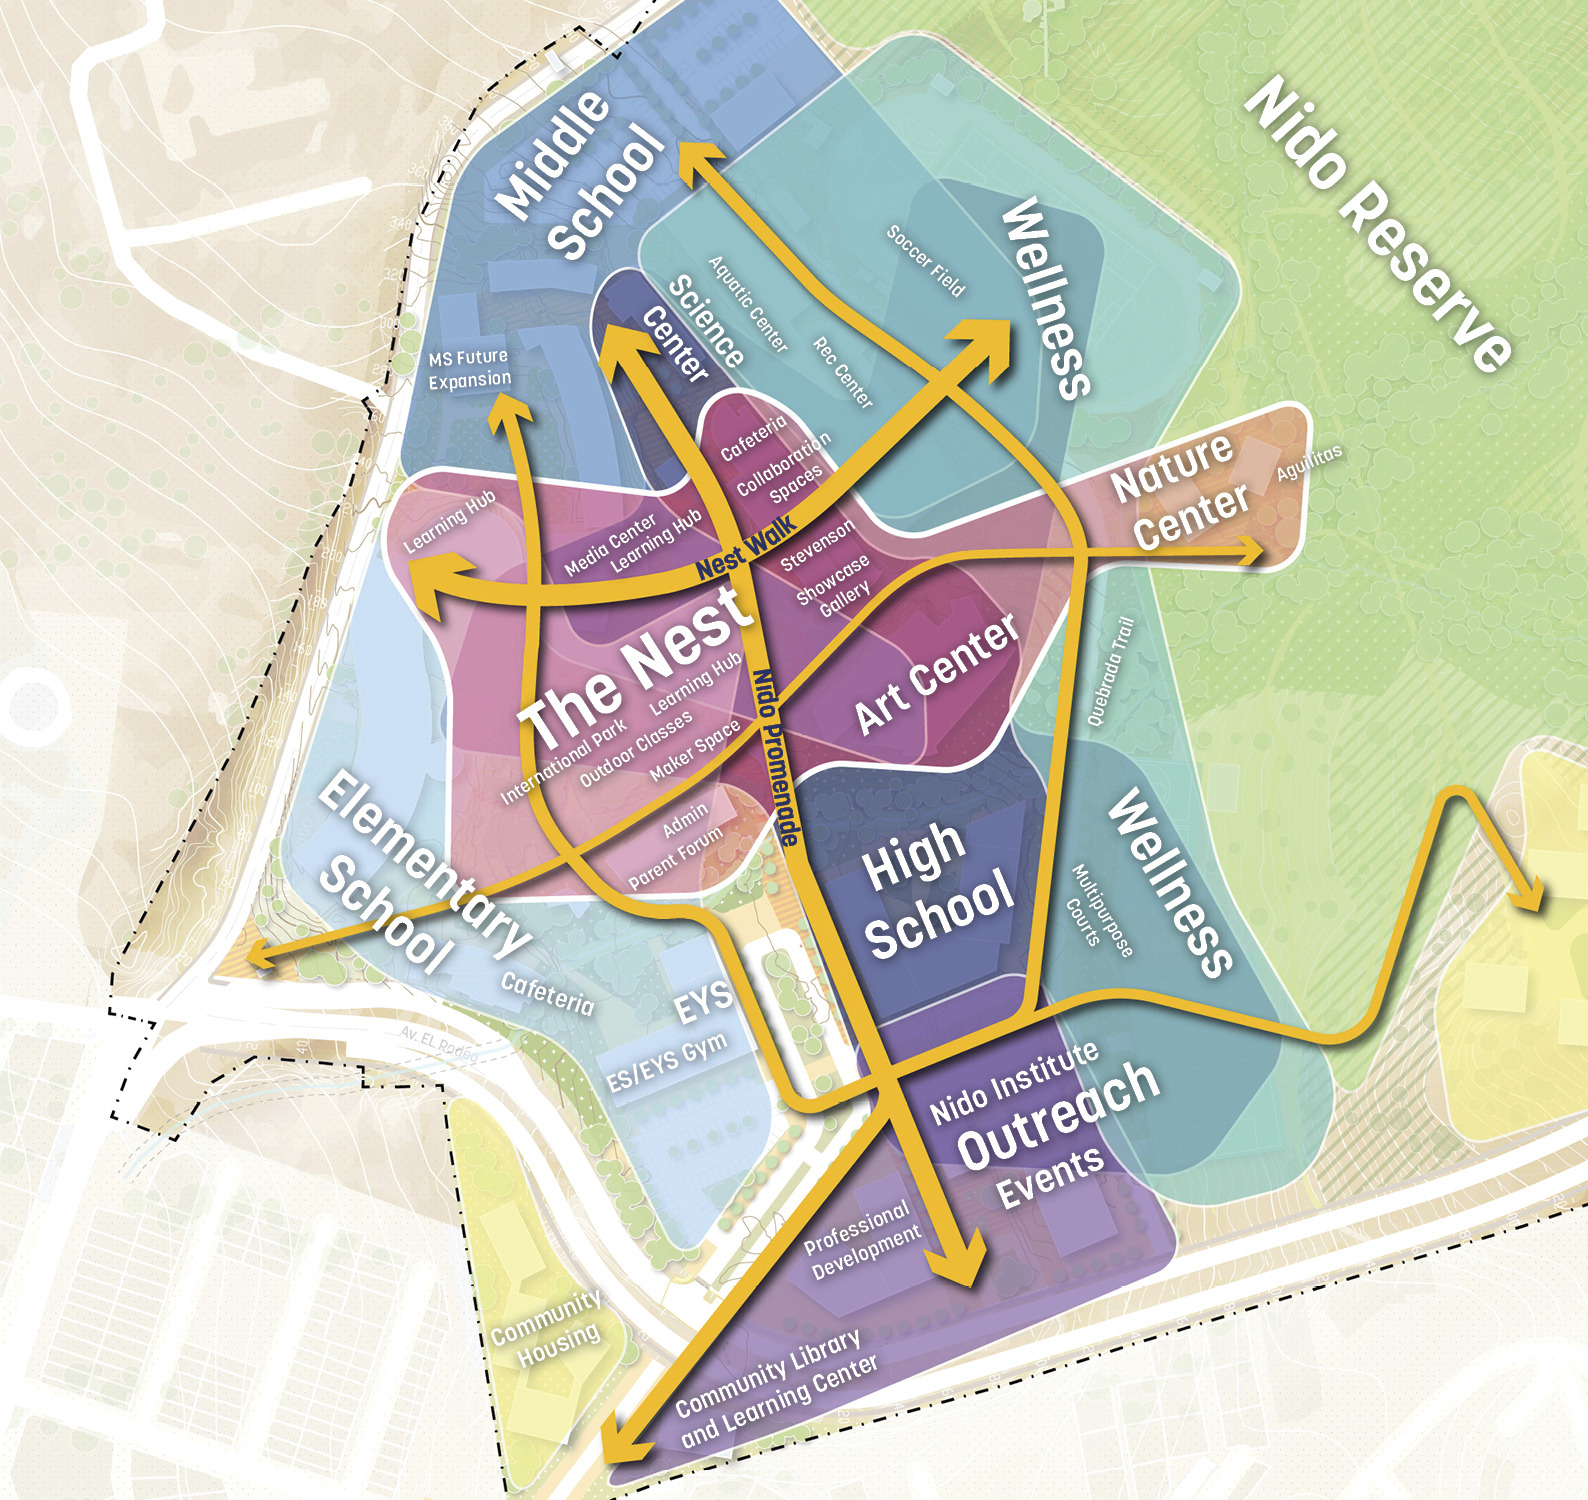 plan diagram highlighting major campus areas in colored blobs and denoting major pedestrian paths with yellow arrows